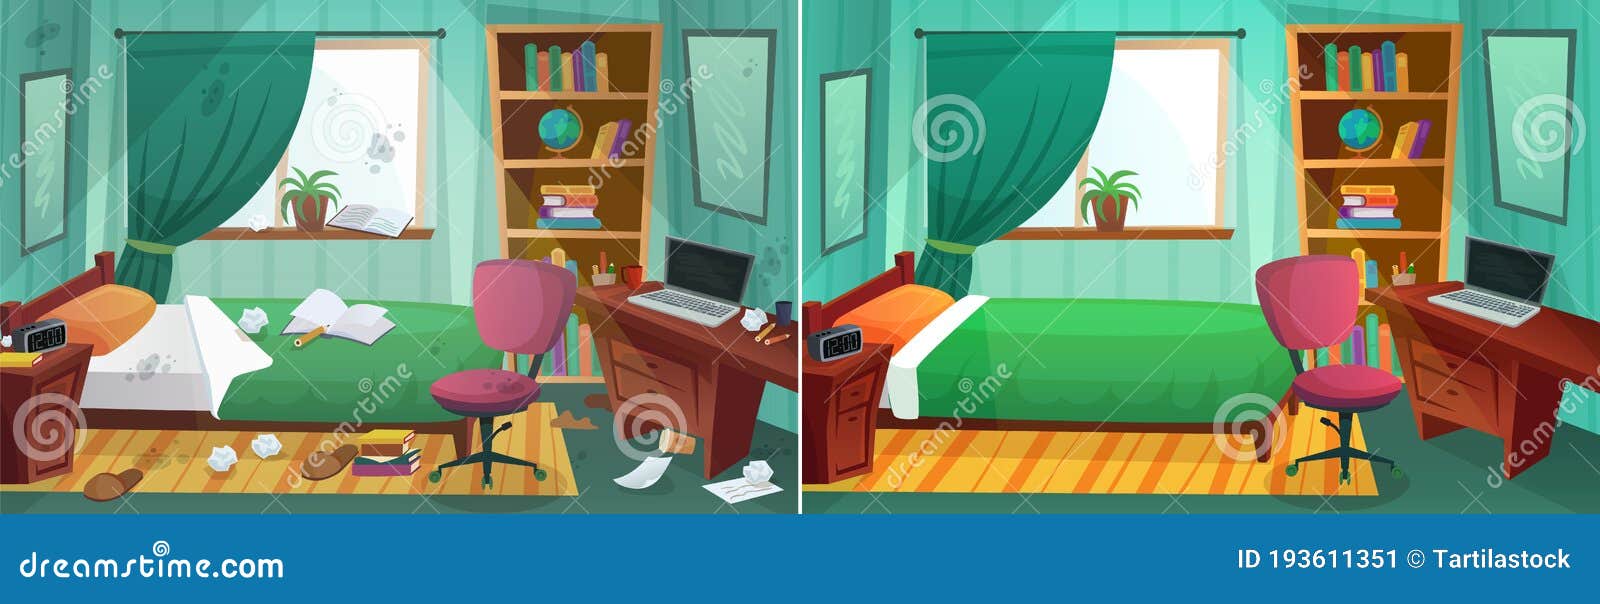 room before and after cleaning. comparison of messy bedroom and clean kid bedroom. home after tiding service